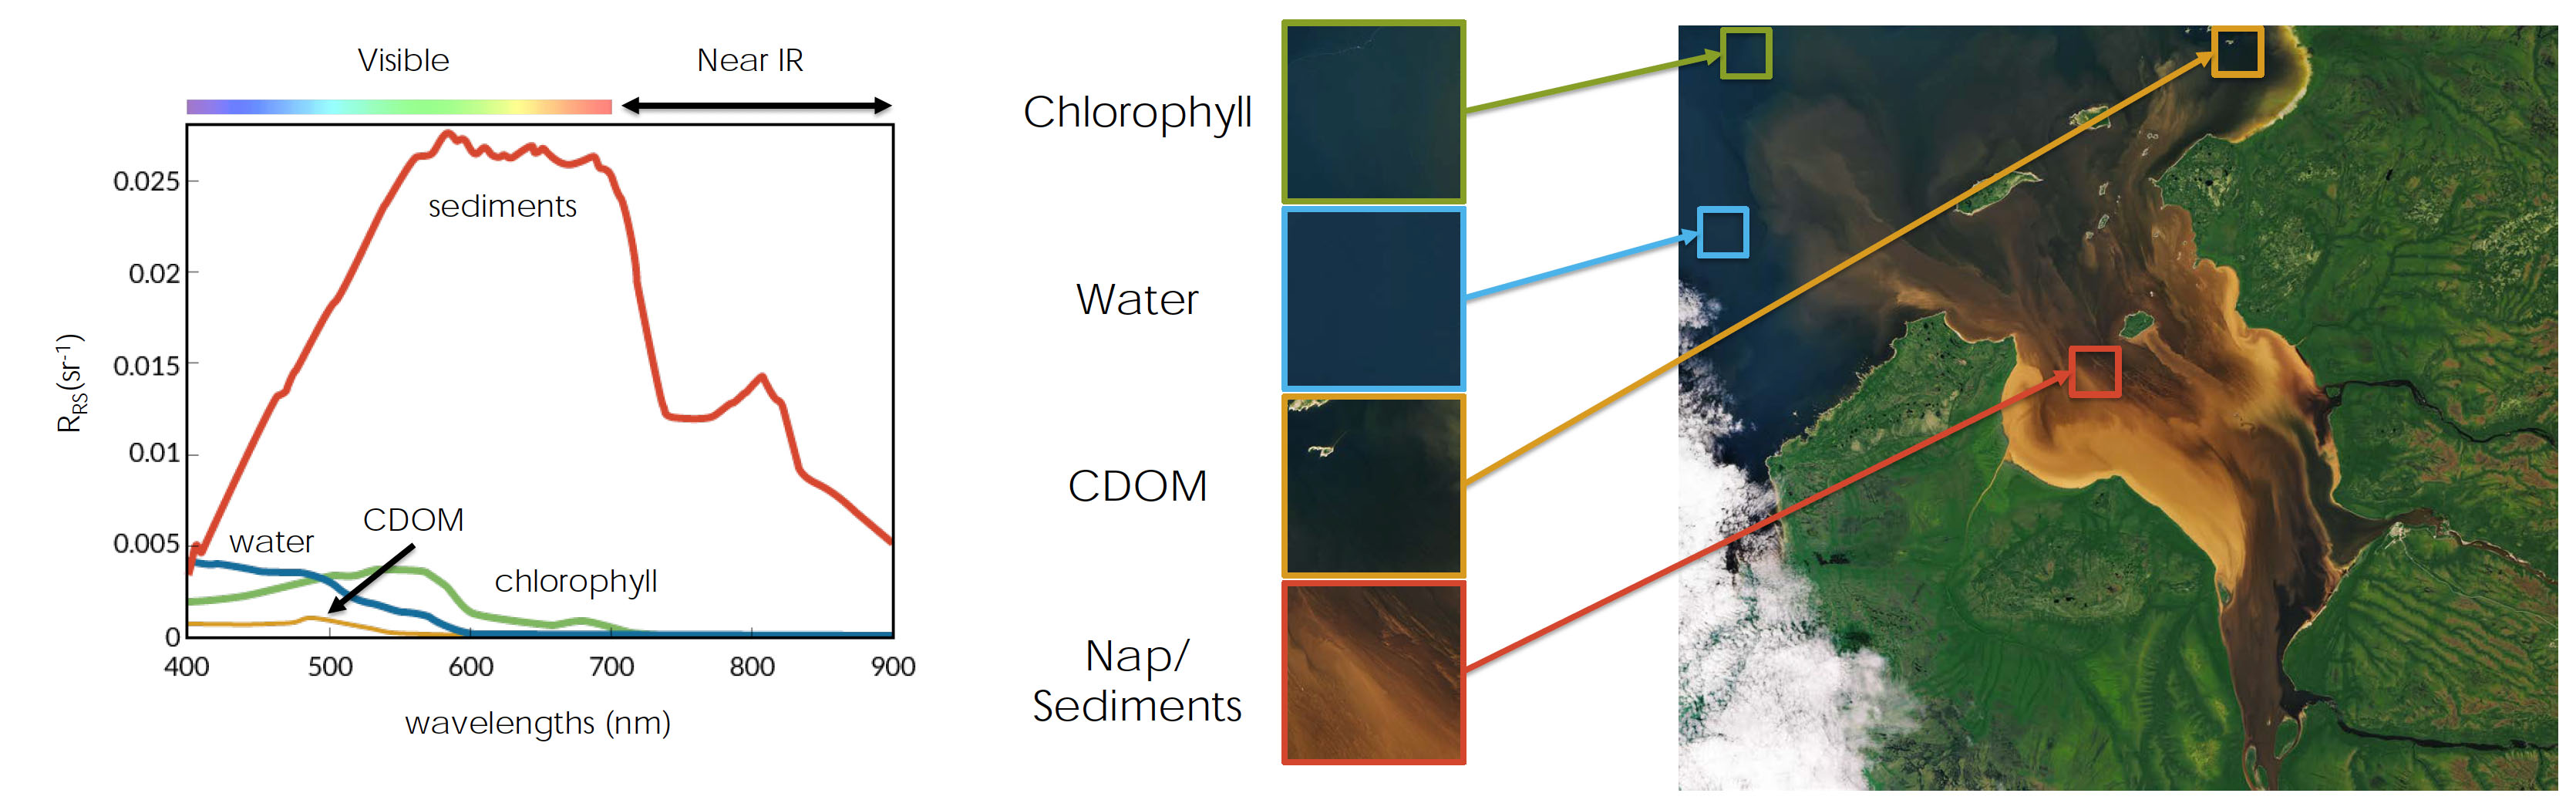 Spectral fingerprints, unique absorption/reflectance patterns at varying wavelengths of the electromagnetic spectrum, of ocean color parameters. Ocean color reflectance can be visualized and a qualitative interpretation made based on color. Generally, chlorophyll appears as green, water as blue, CDOM as black, and sediments/NAP as browns and whites.